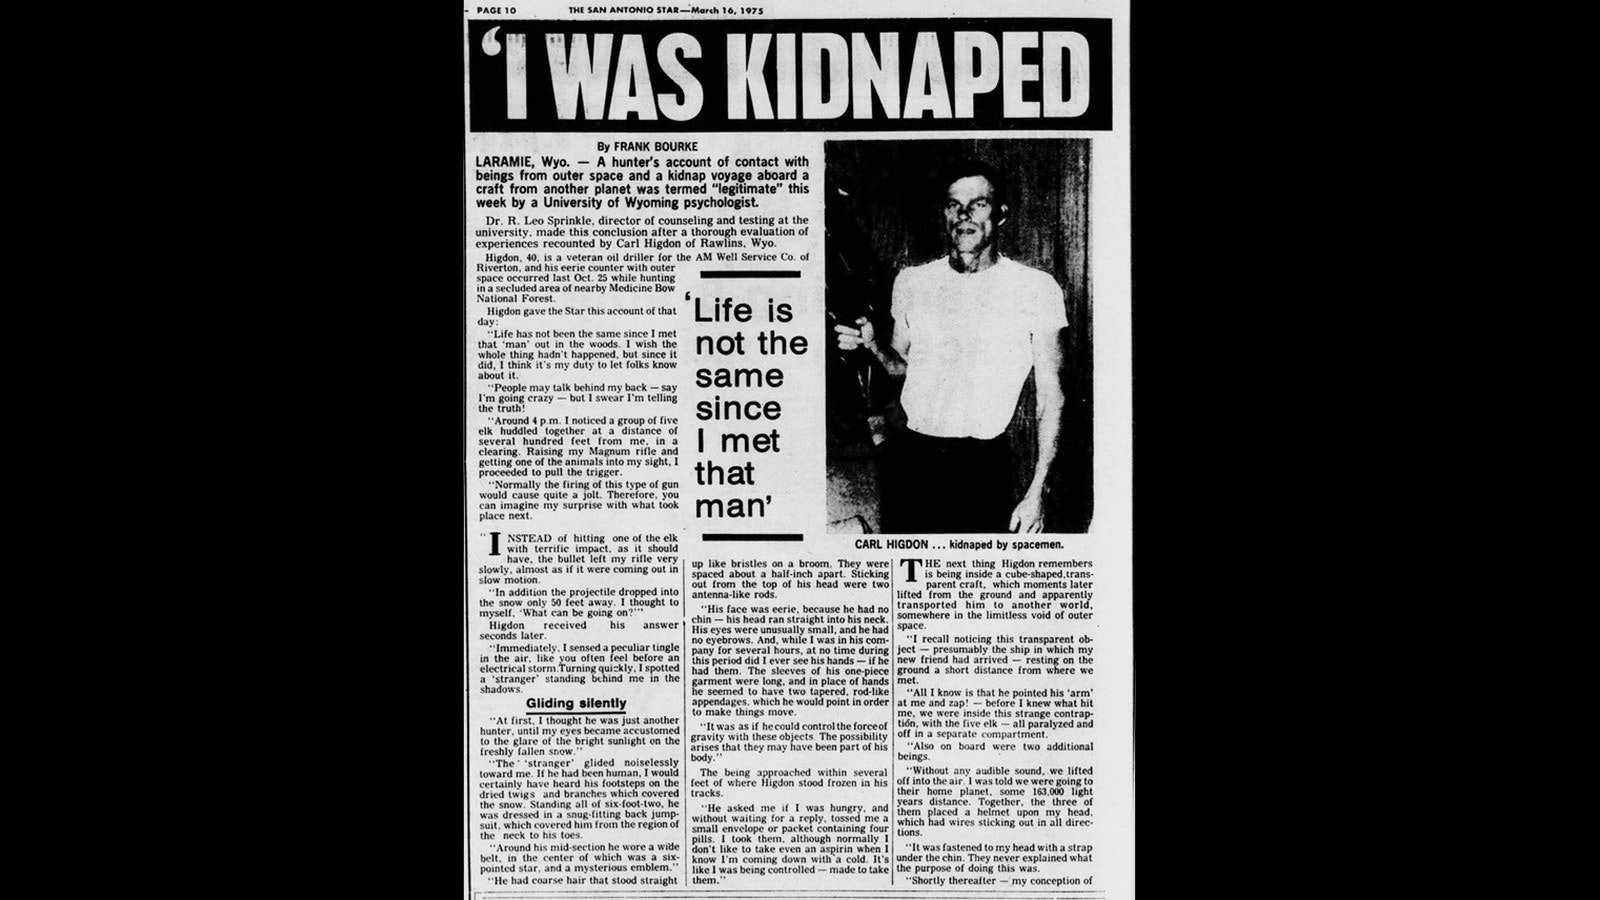 The March 16, 1973, edition of the San Antonio Star features Wyoming resident Carl Higdon and his story of being abducted by aliens.